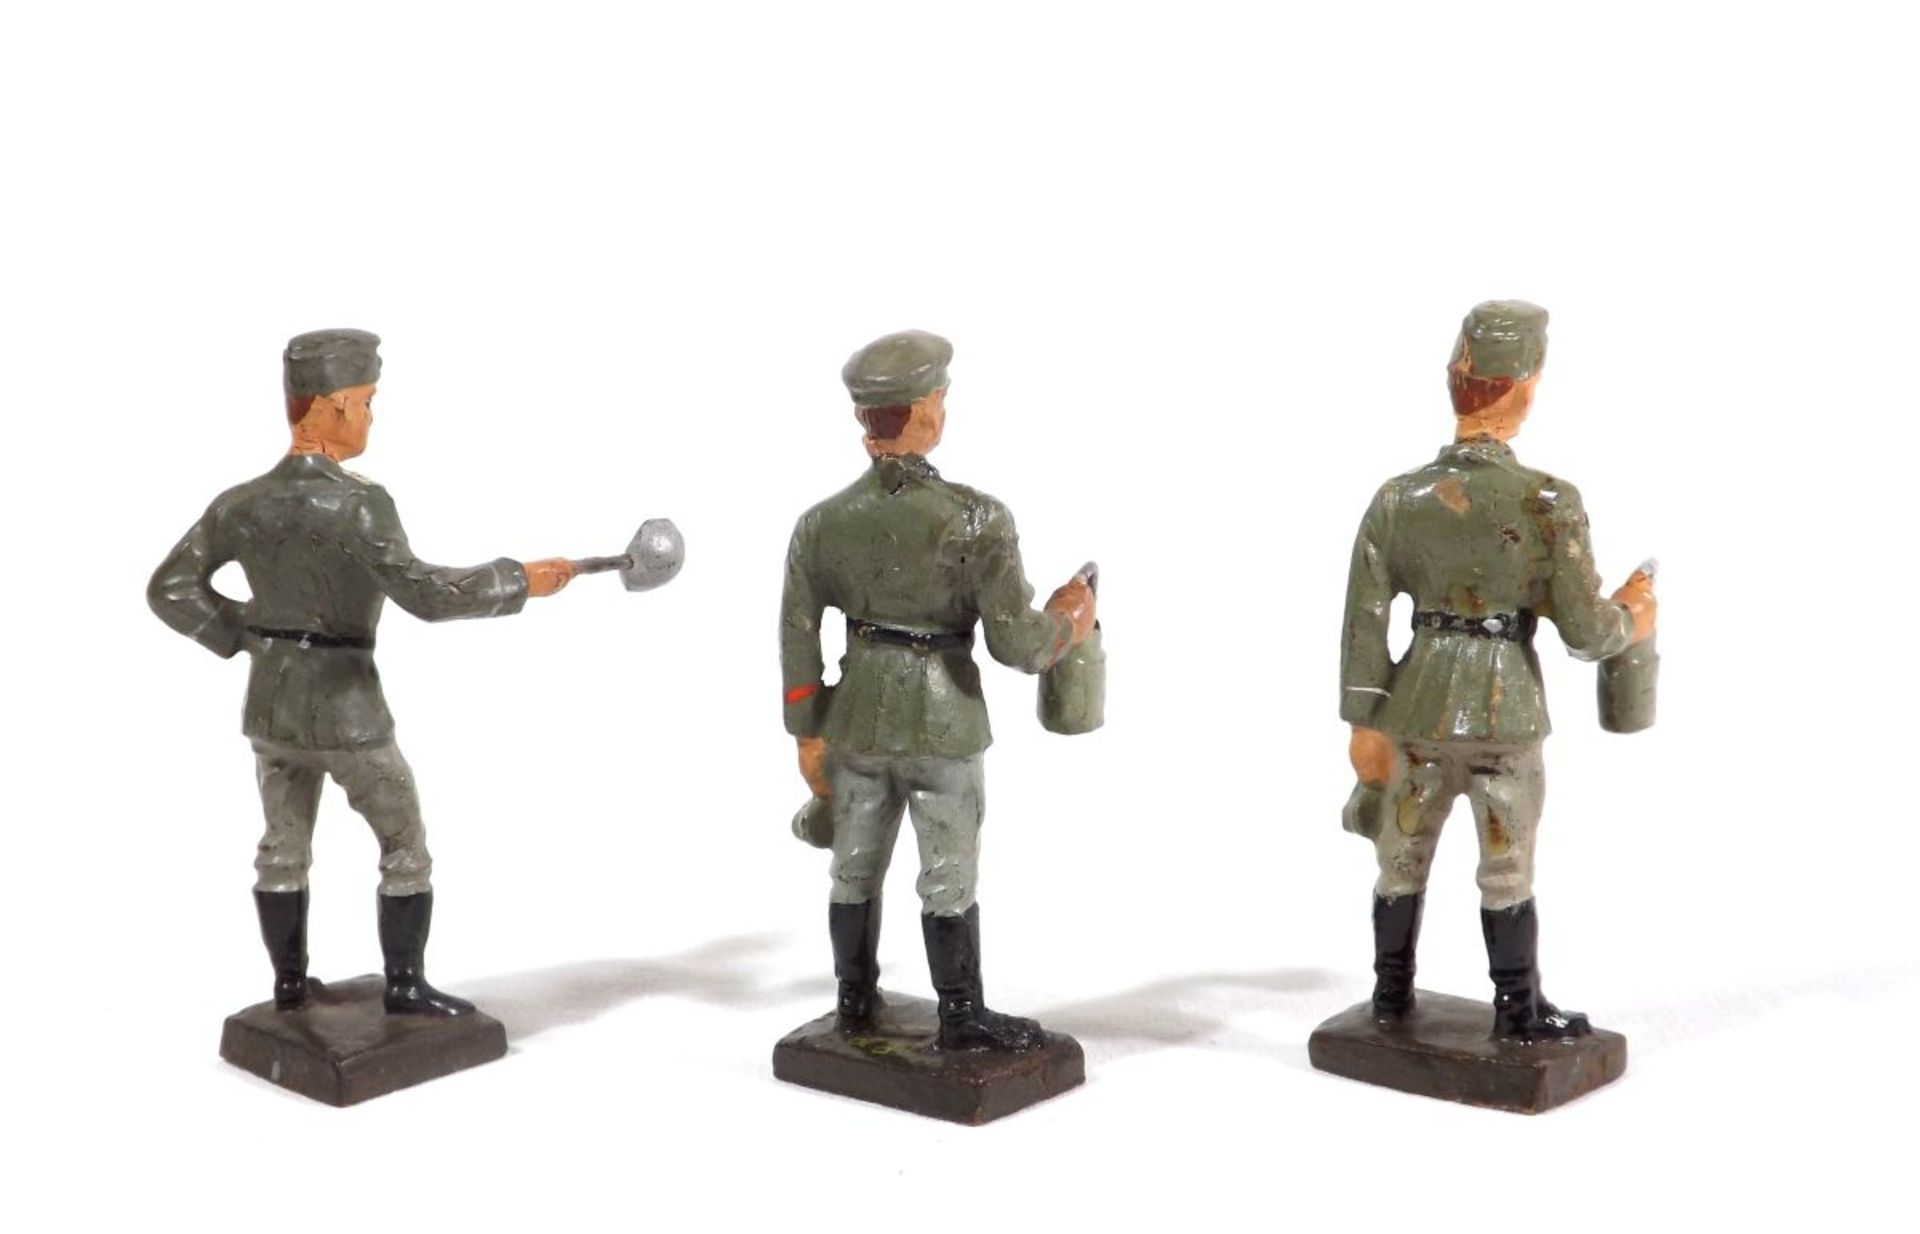 German military, Lineol, composition figures, 7-7,5 cm size, made in Germany about 1938 - Bild 2 aus 2